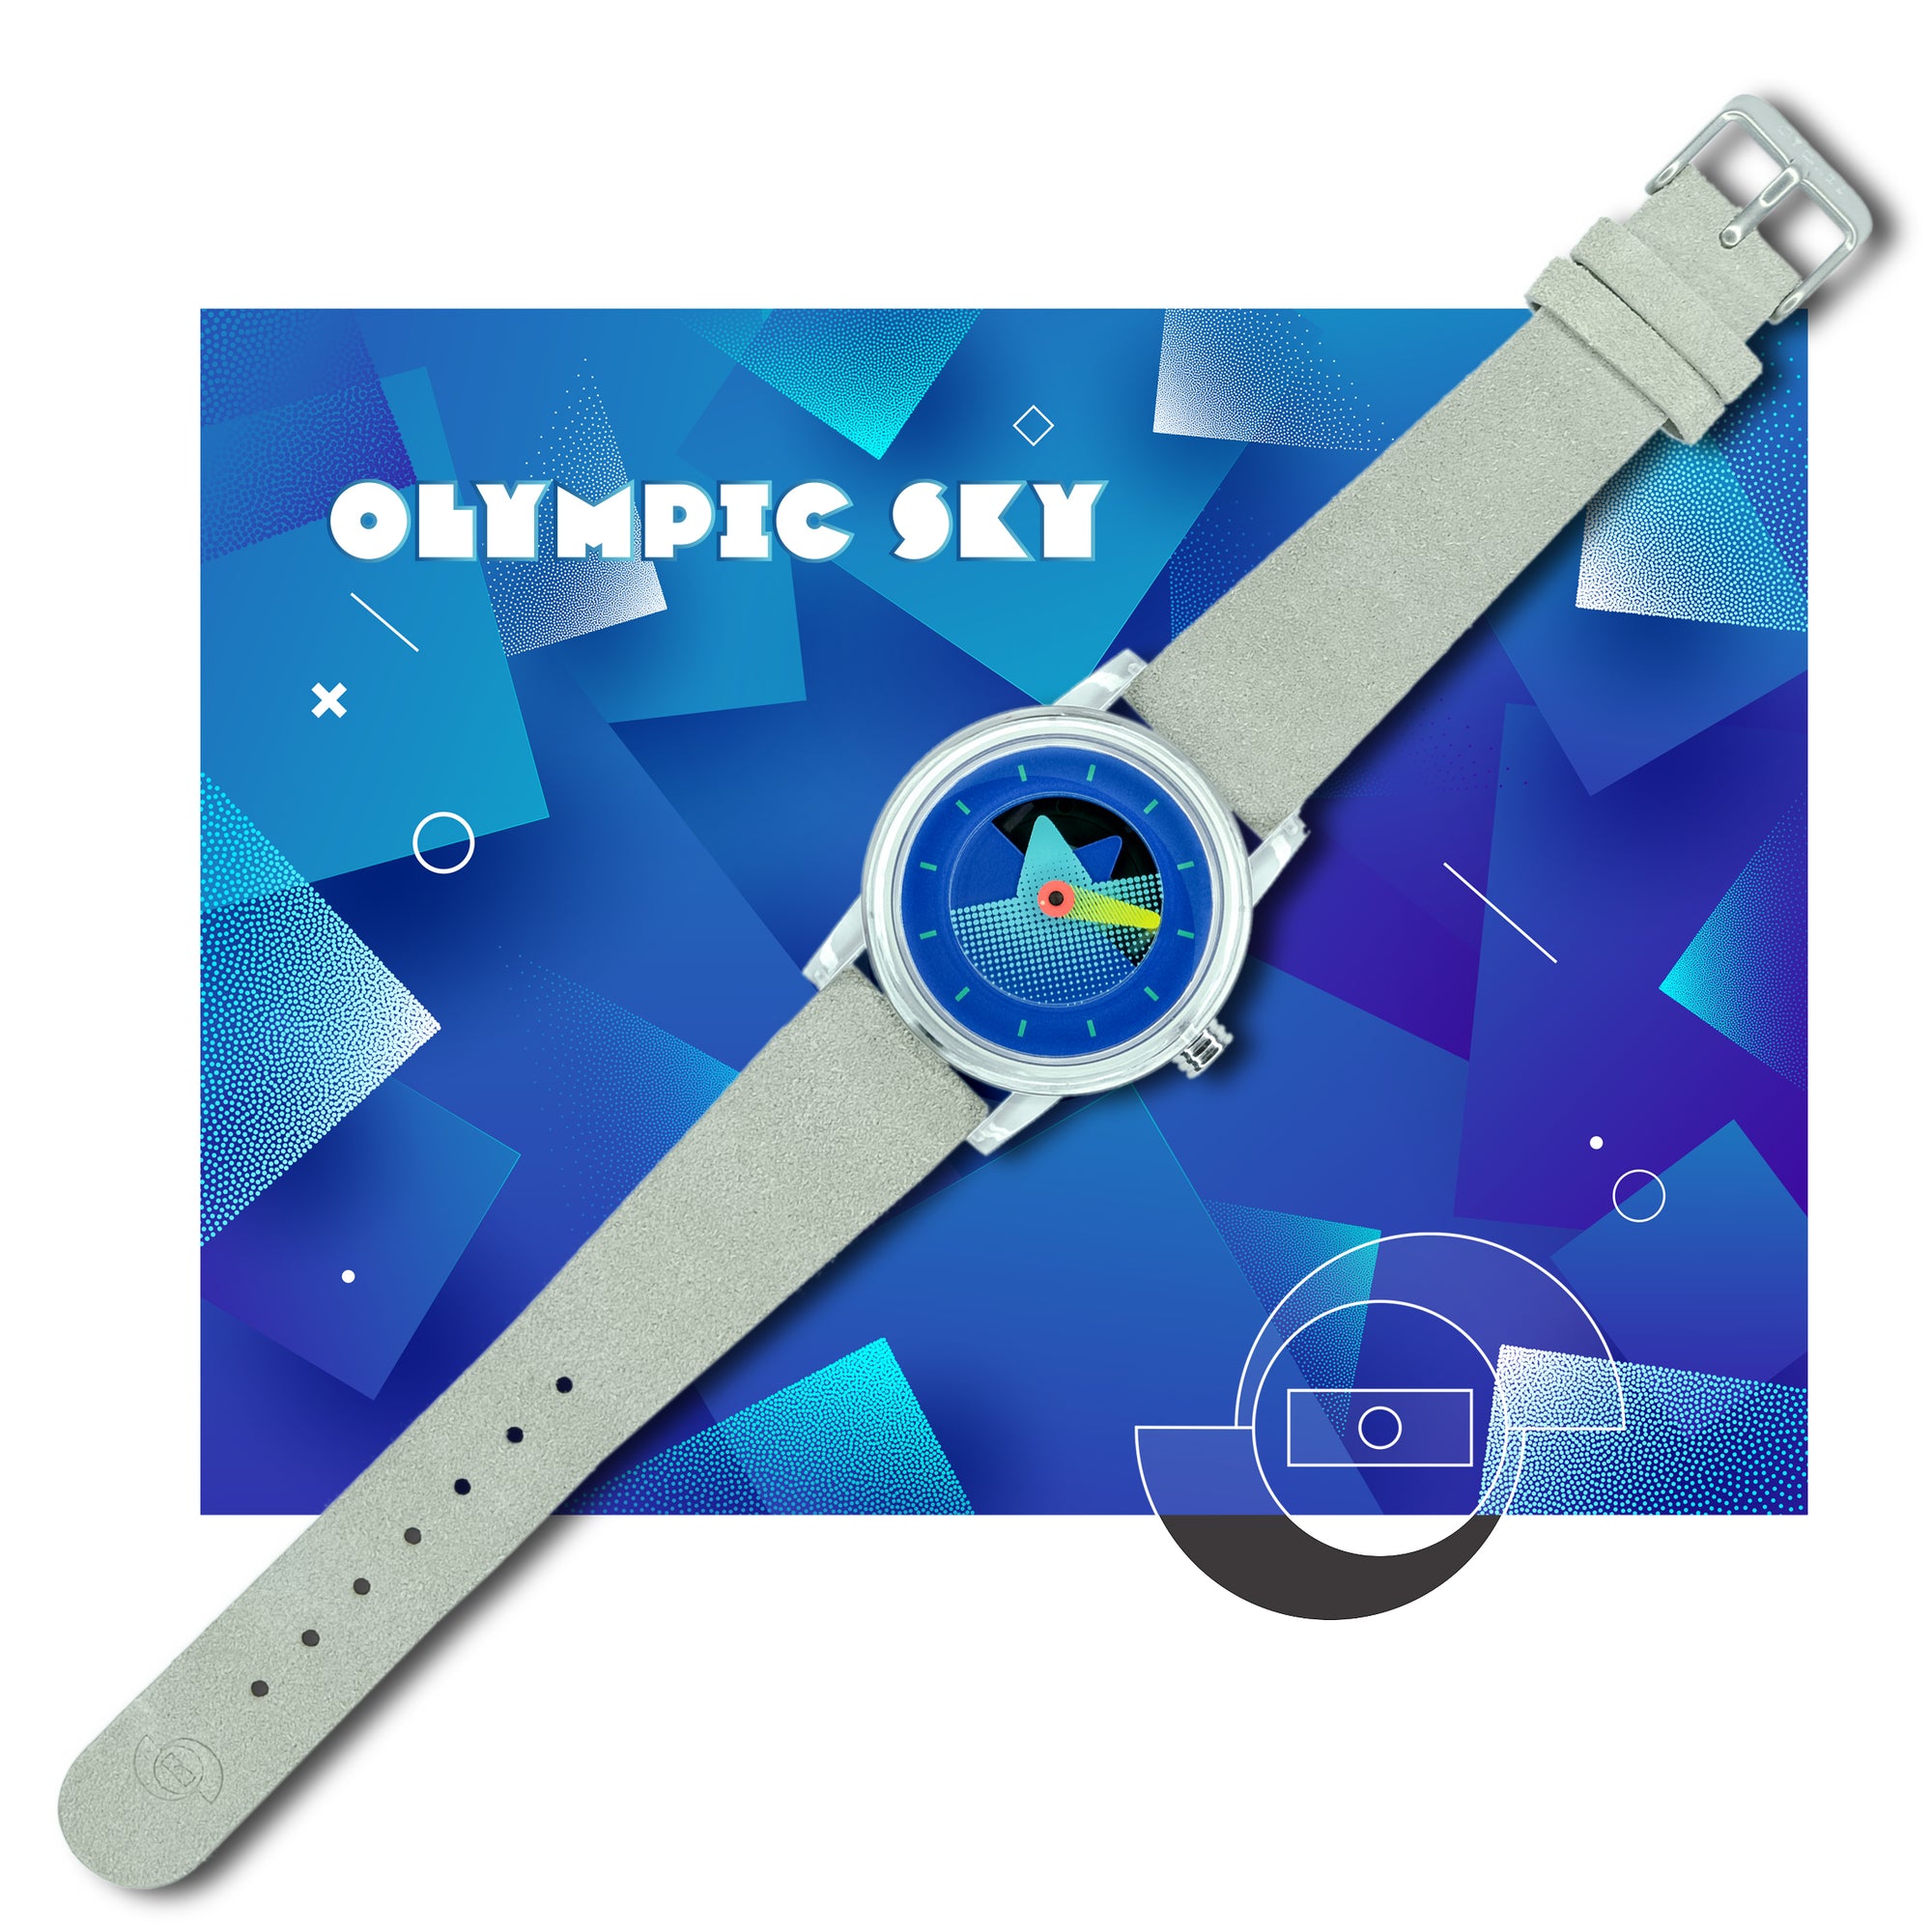 So Labs Layer 1.1 One Series Watch Watches Olympic Sky